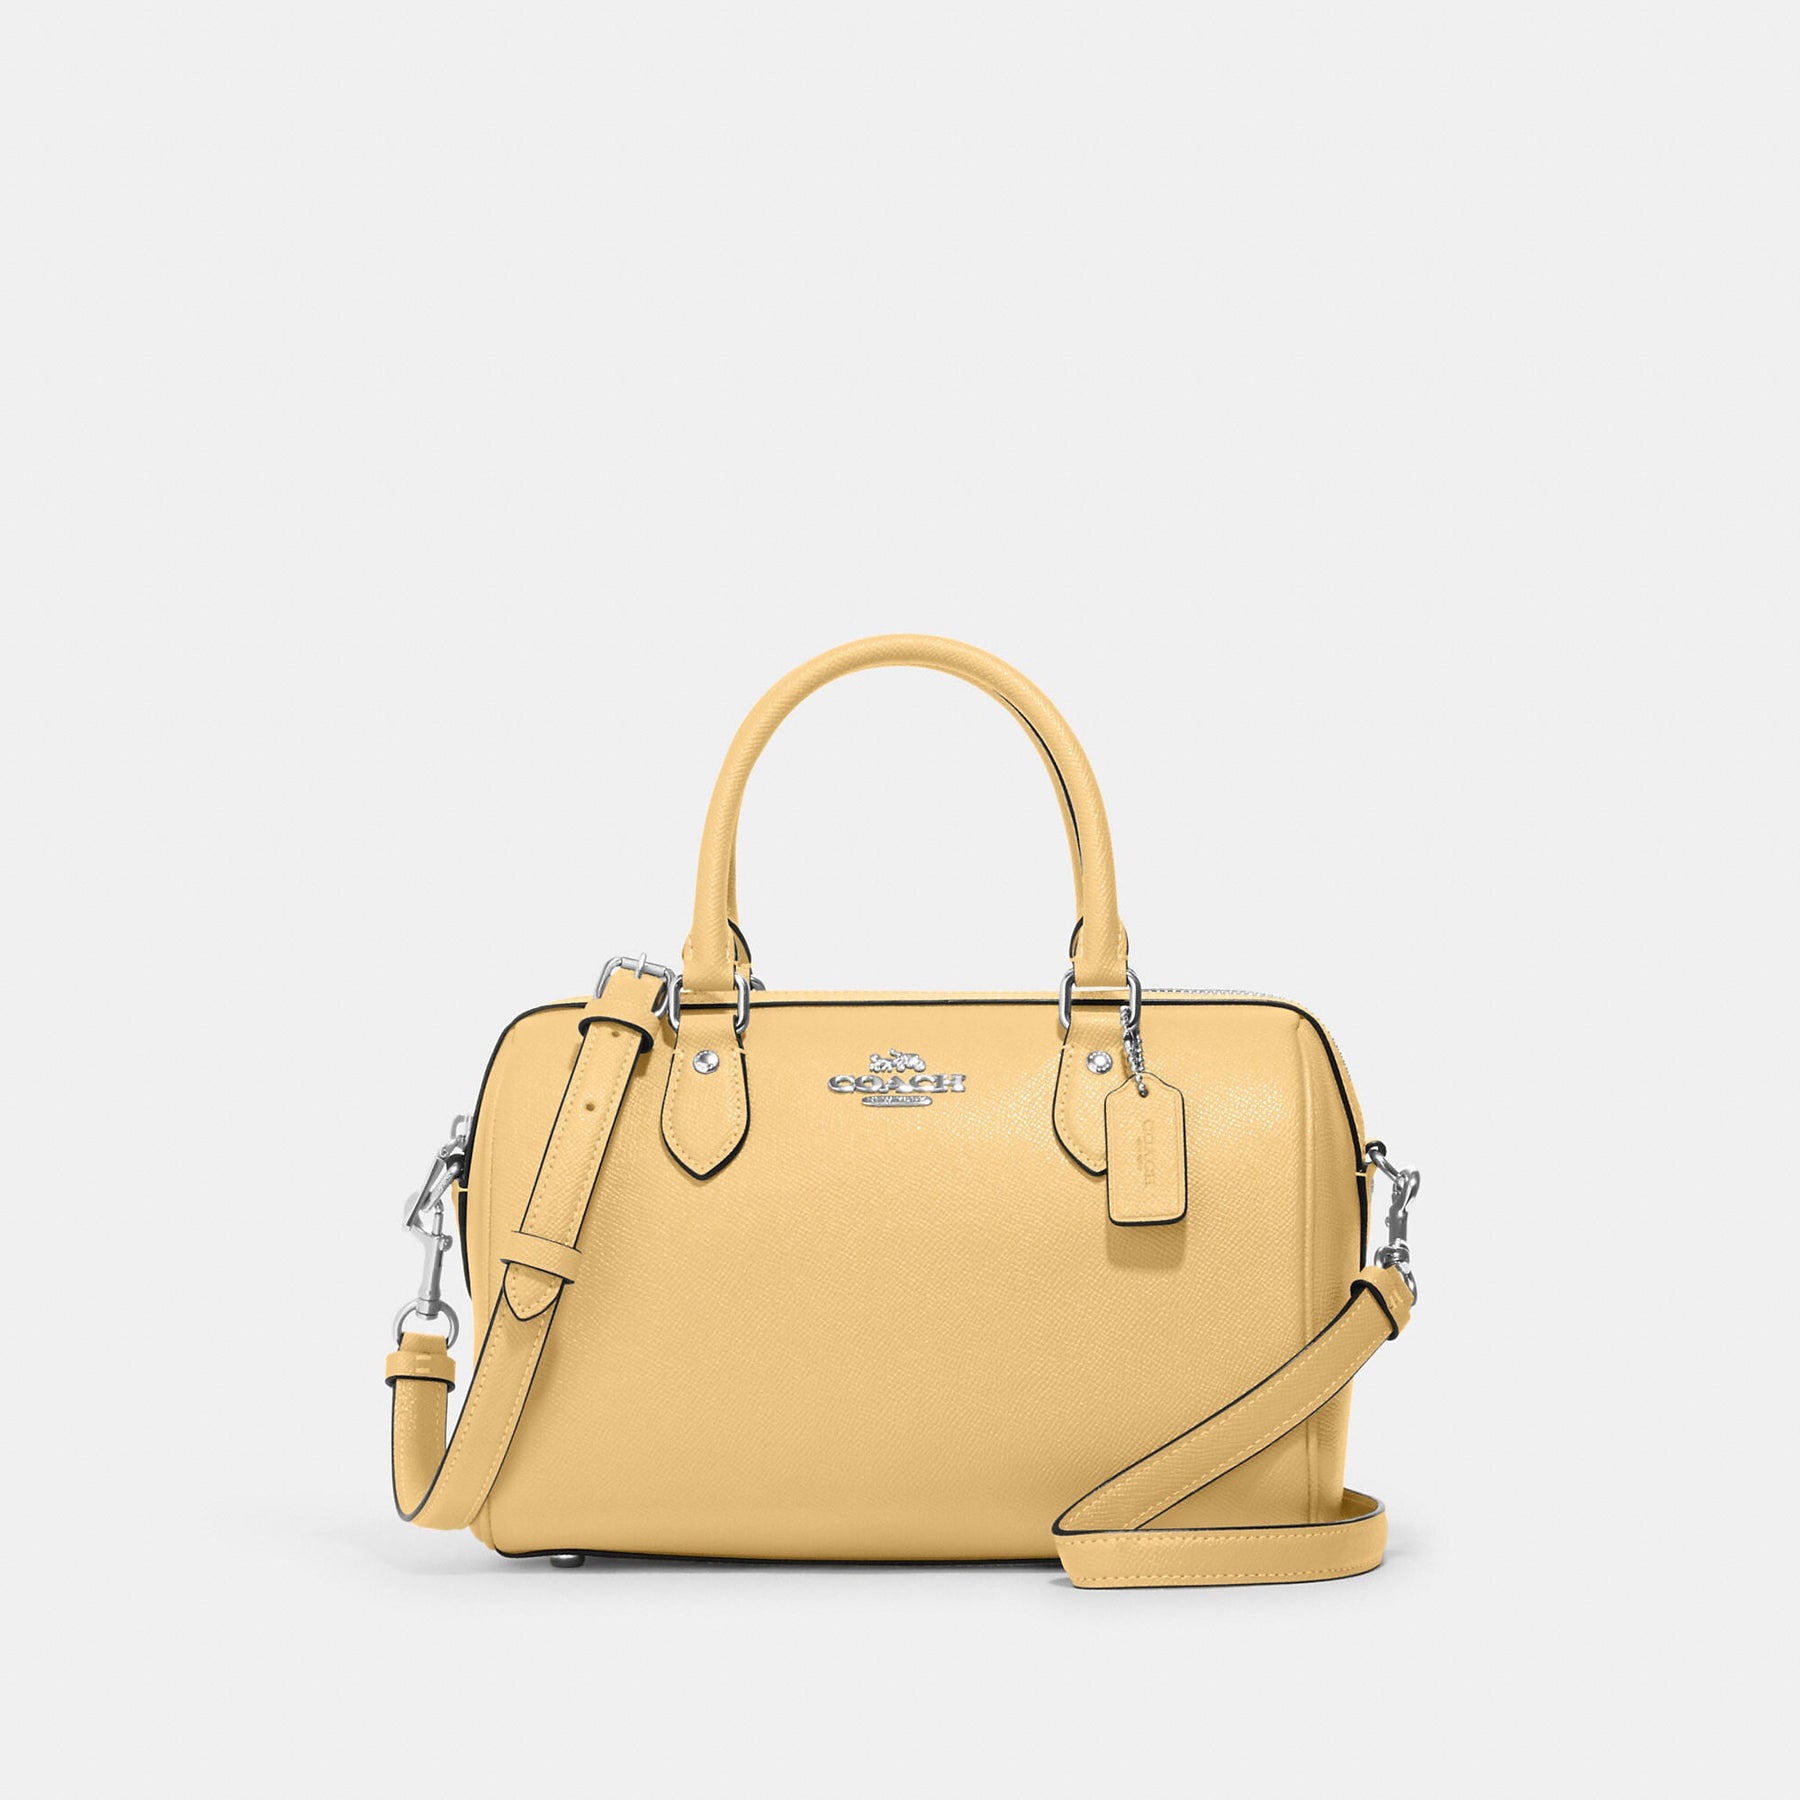 Coach Outlet Rowan Satchel in Natural